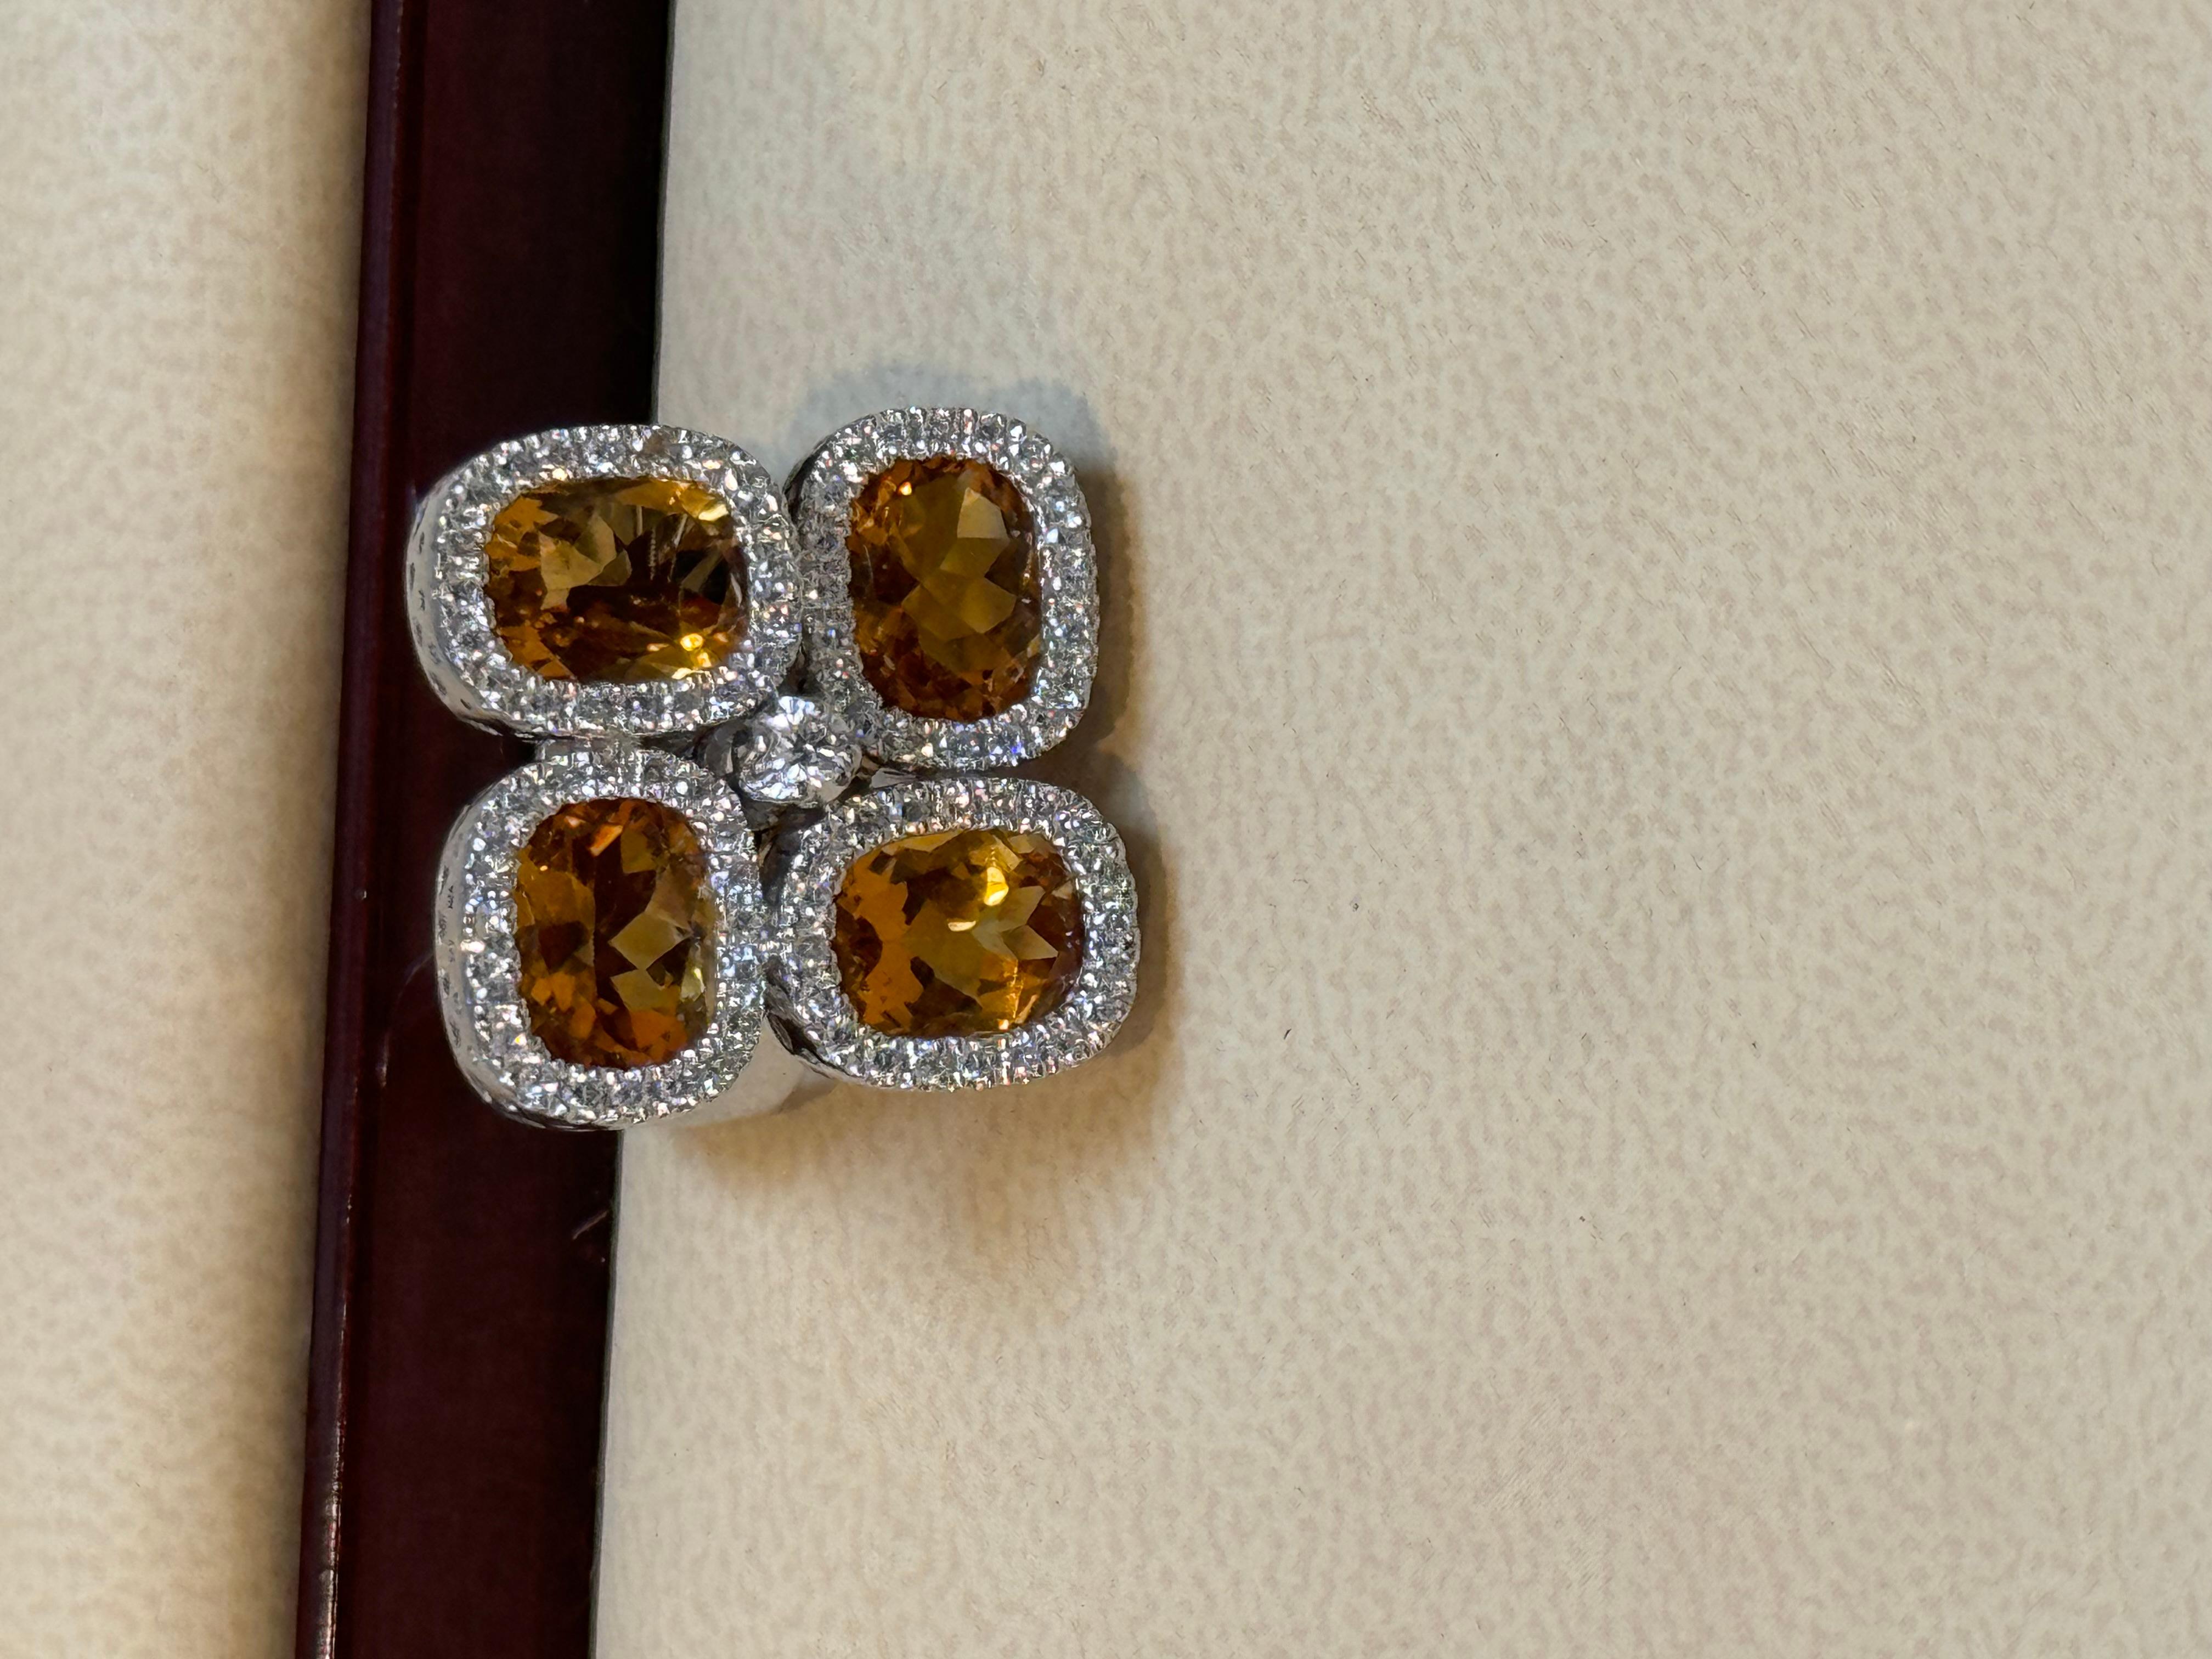 Approximately 10 Ct Natural Citrine & 1.5 CT Diamond Cocktail Ring 18 Karat White Gold, Estate
Beautiful statement piece with four pieces of citrine sitting in Geometric pattern , each one is surrounded by brilliant cut diamonds. 
This is a ring